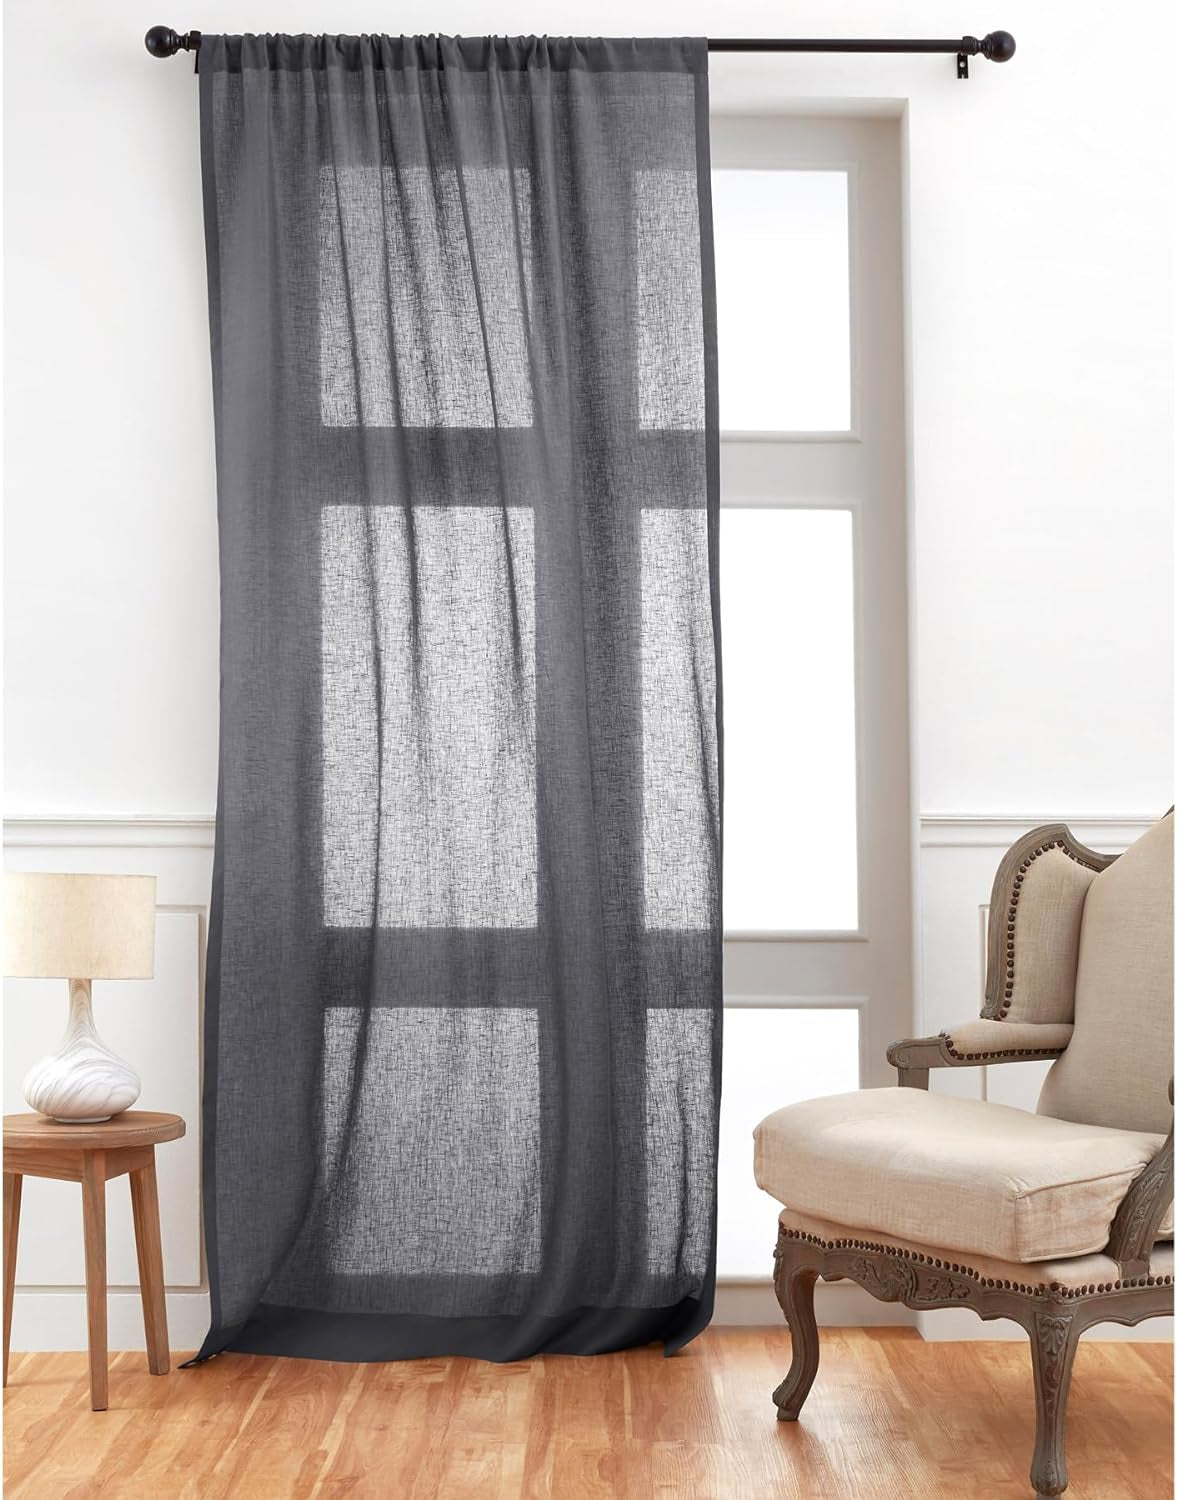 Solino Home Linen Sheer Curtain – 52 X 45 Inch Light Natural Rod Pocket Window Panel – 100% Pure Natural Fabric Curtain for Living Room, Indoor, Outdoor – Handcrafted from European Flax  Solino Home Charcoal 52 X 132 Inch 